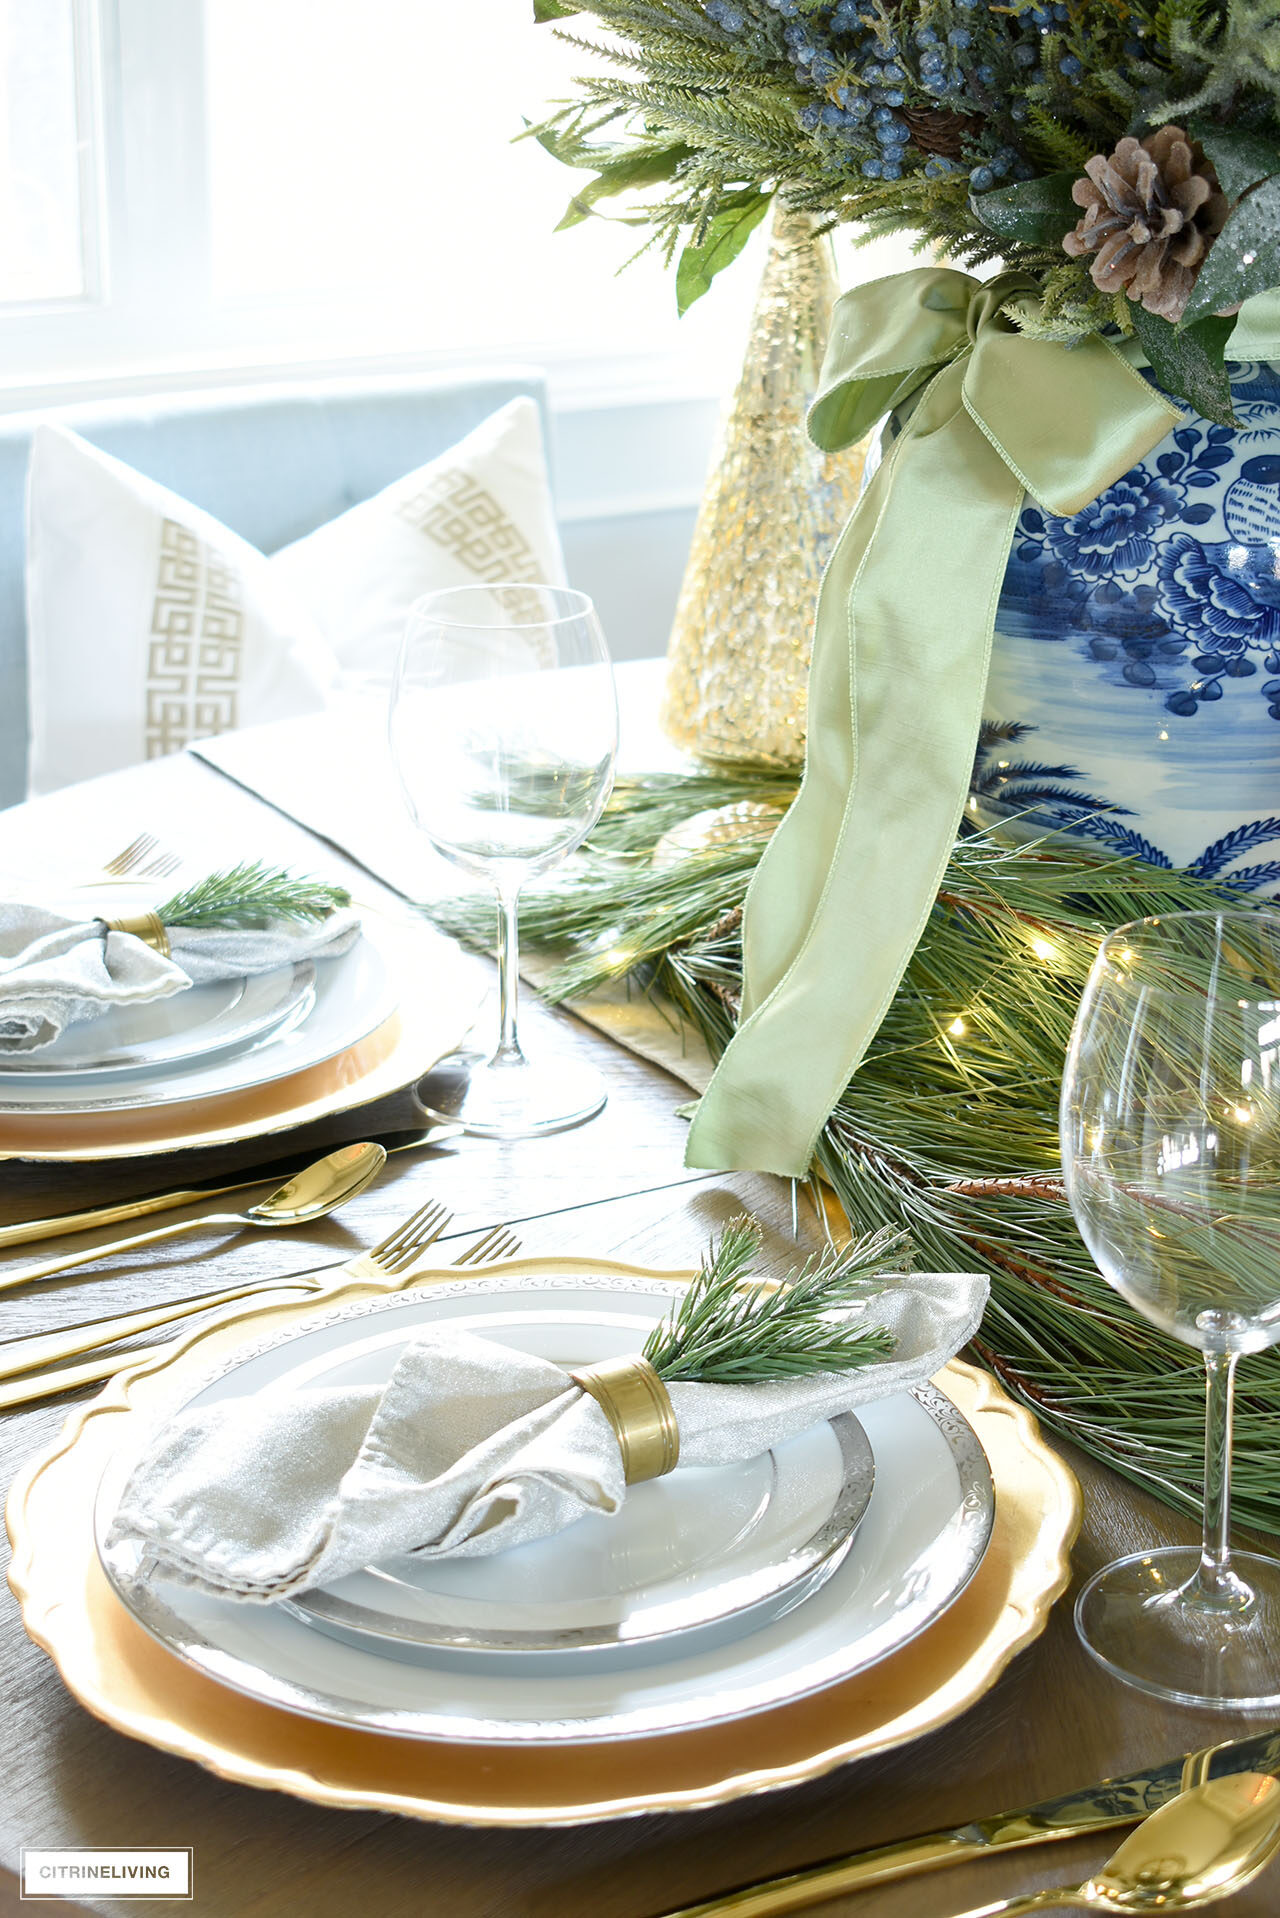 Silver and gold table setting for Christmas, greenery accents adds an elegant touch